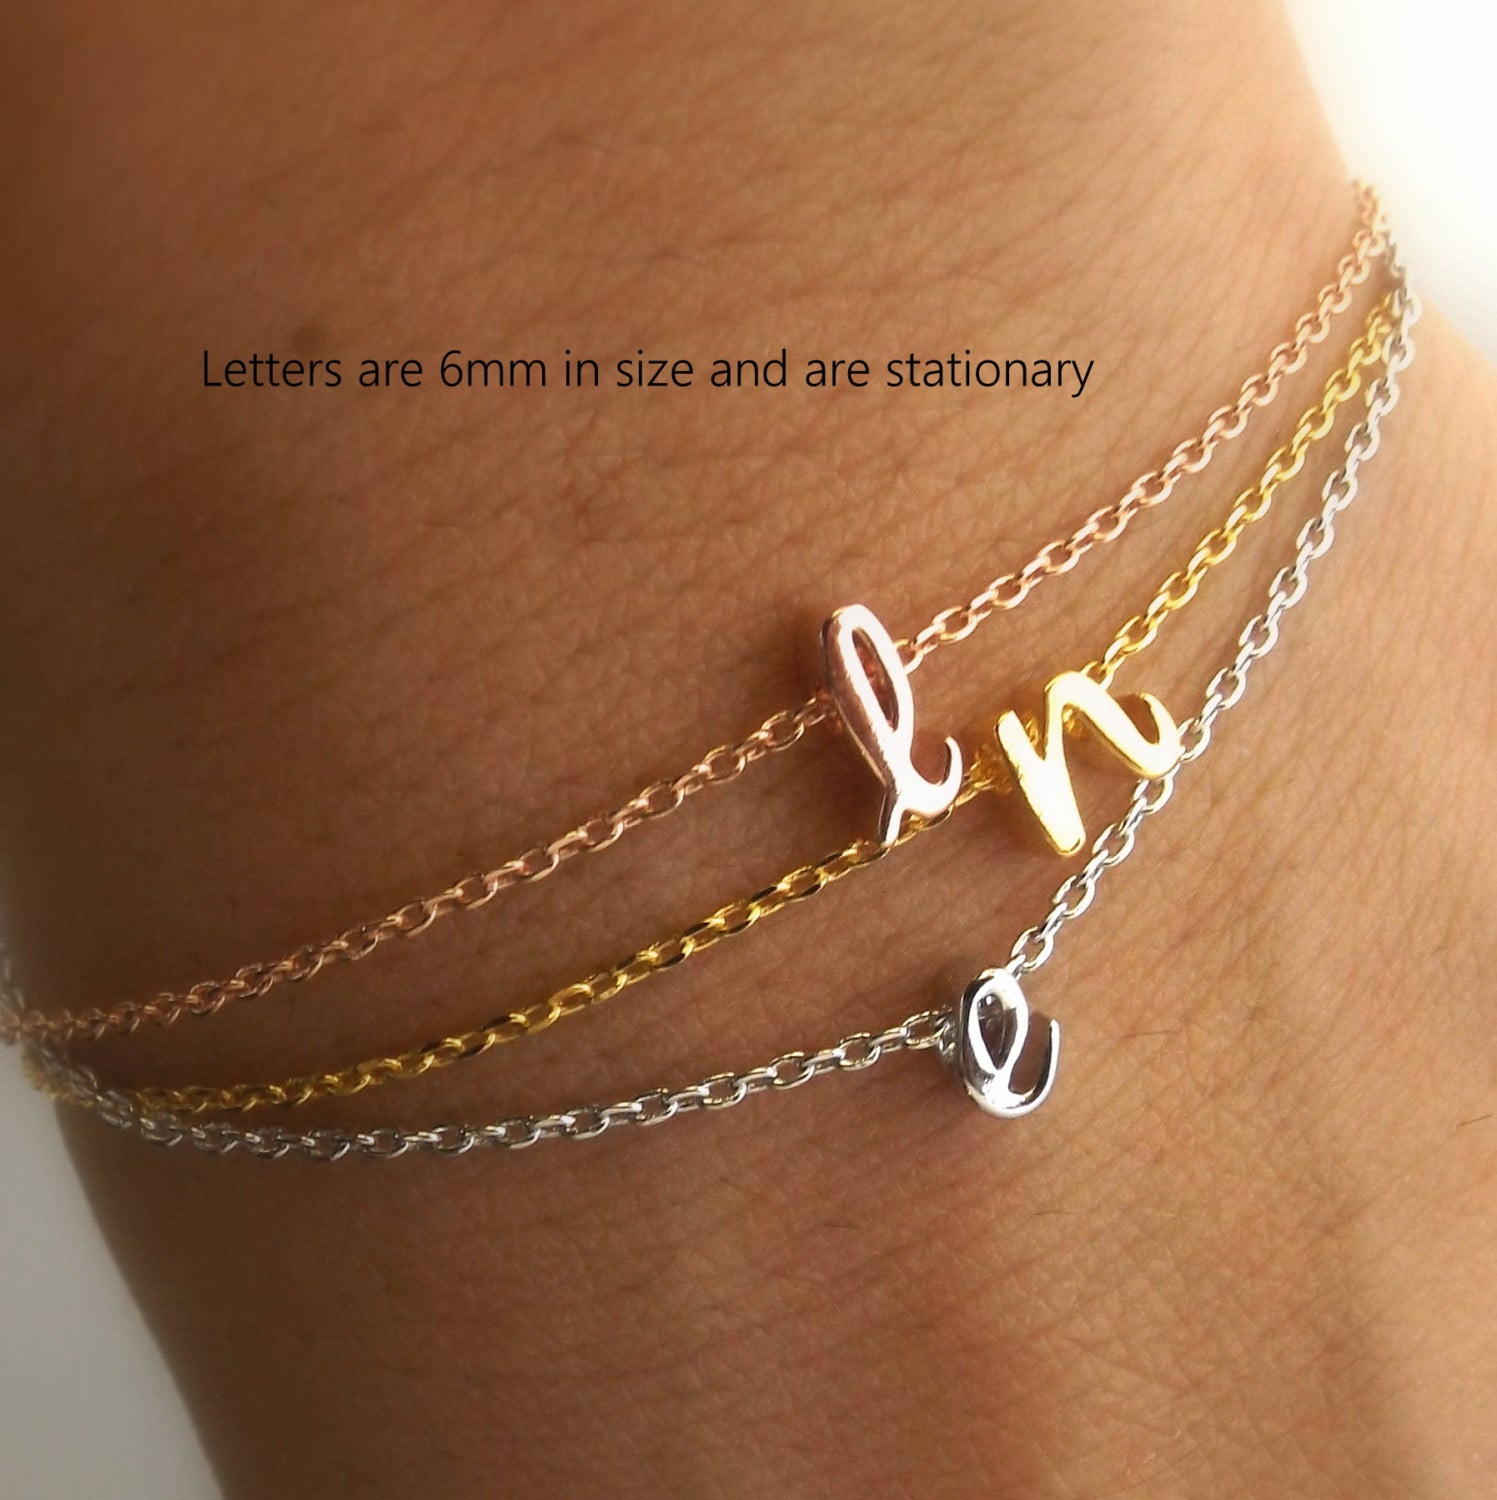 Buy Alphabet Initial S Silver Rhodium Plated Bracelet at